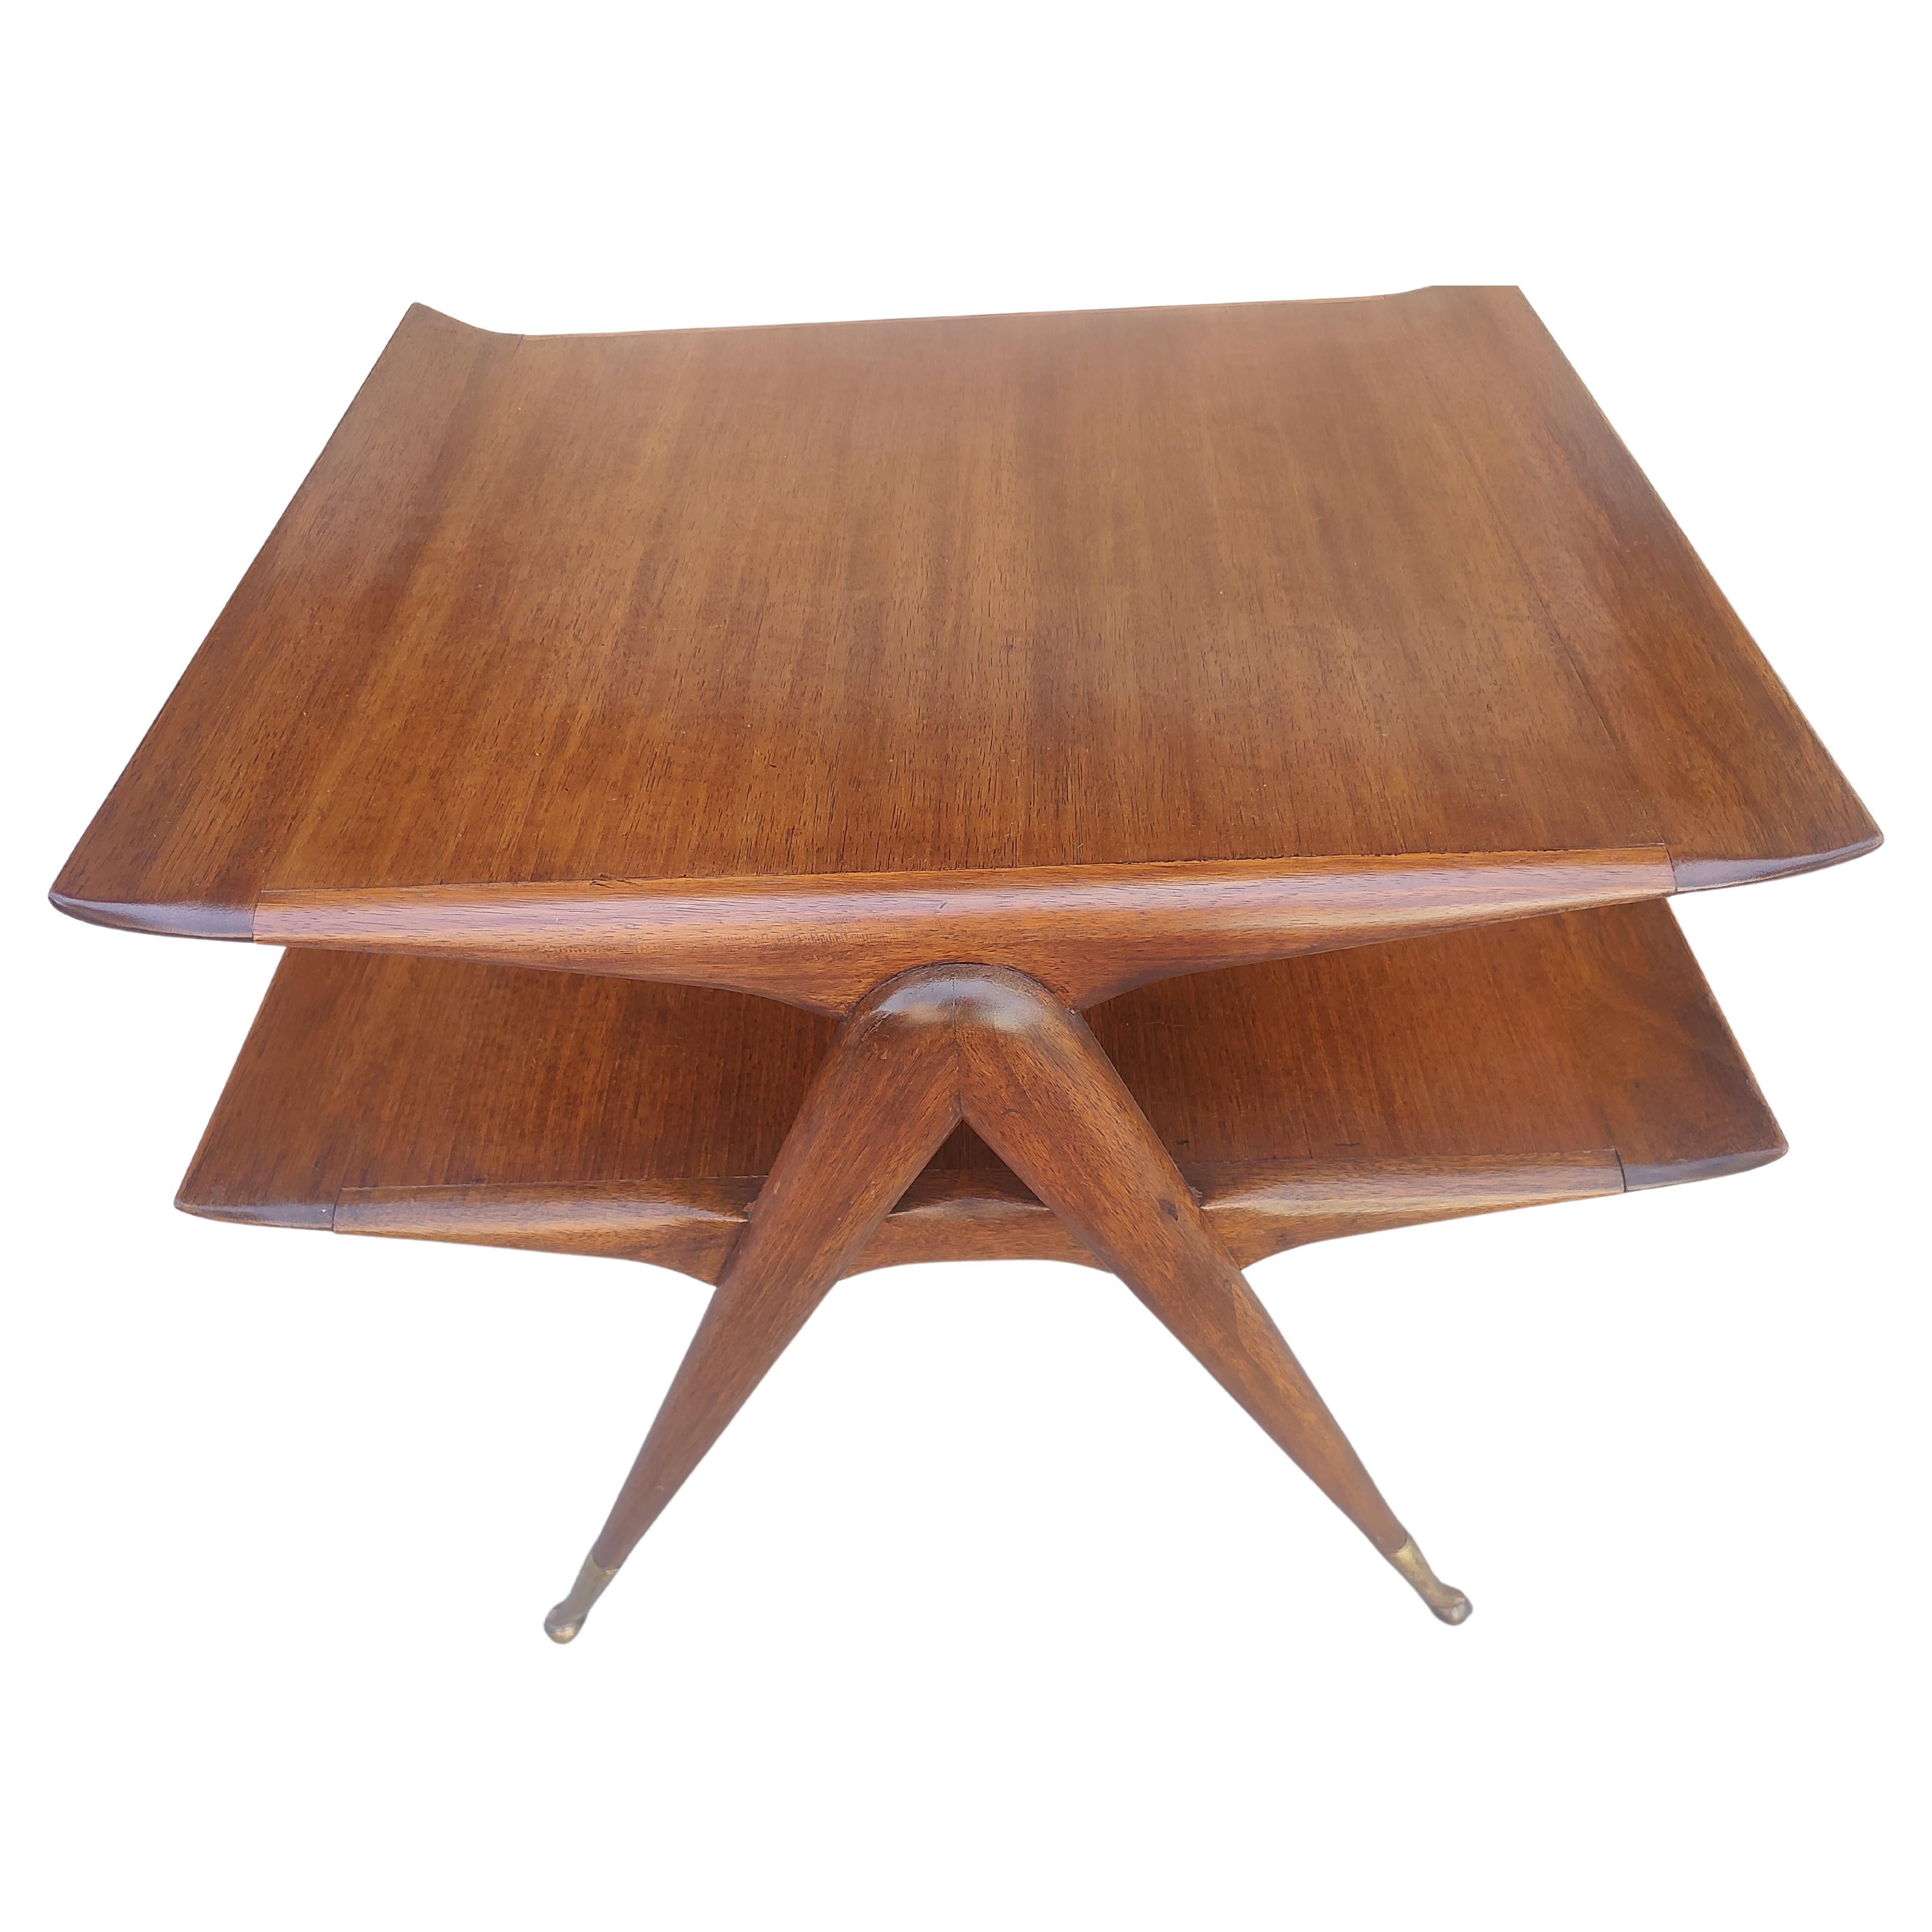 Brass Mid Century Modern End Sofa Walnut Table Attributed to Ico & Luisa Parisi C1955 For Sale